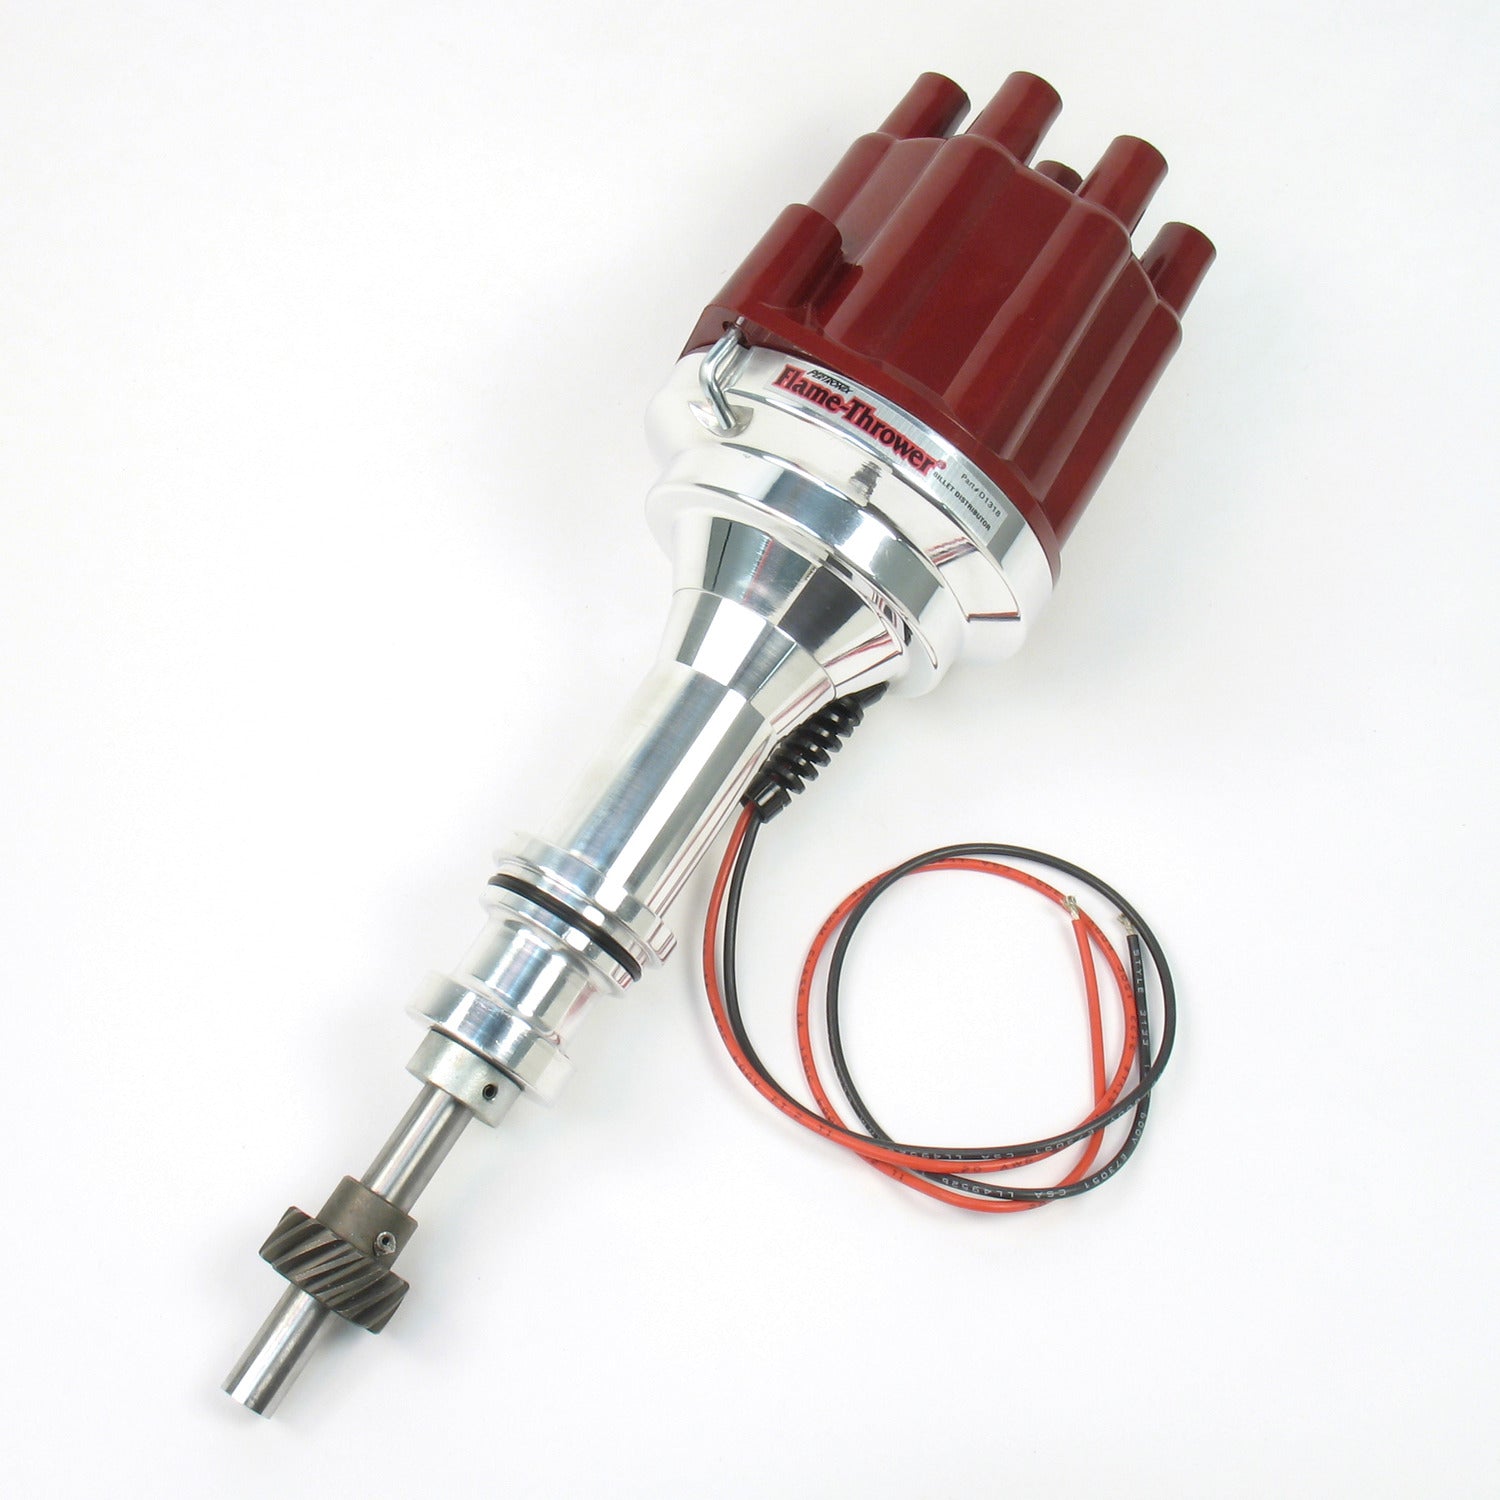 PerTronix D131801 Flame-Thrower Electronic Distributor Billet Ford 351W Plug and Play with Ignitor II Technology Non Vacuum Advance Red Cap